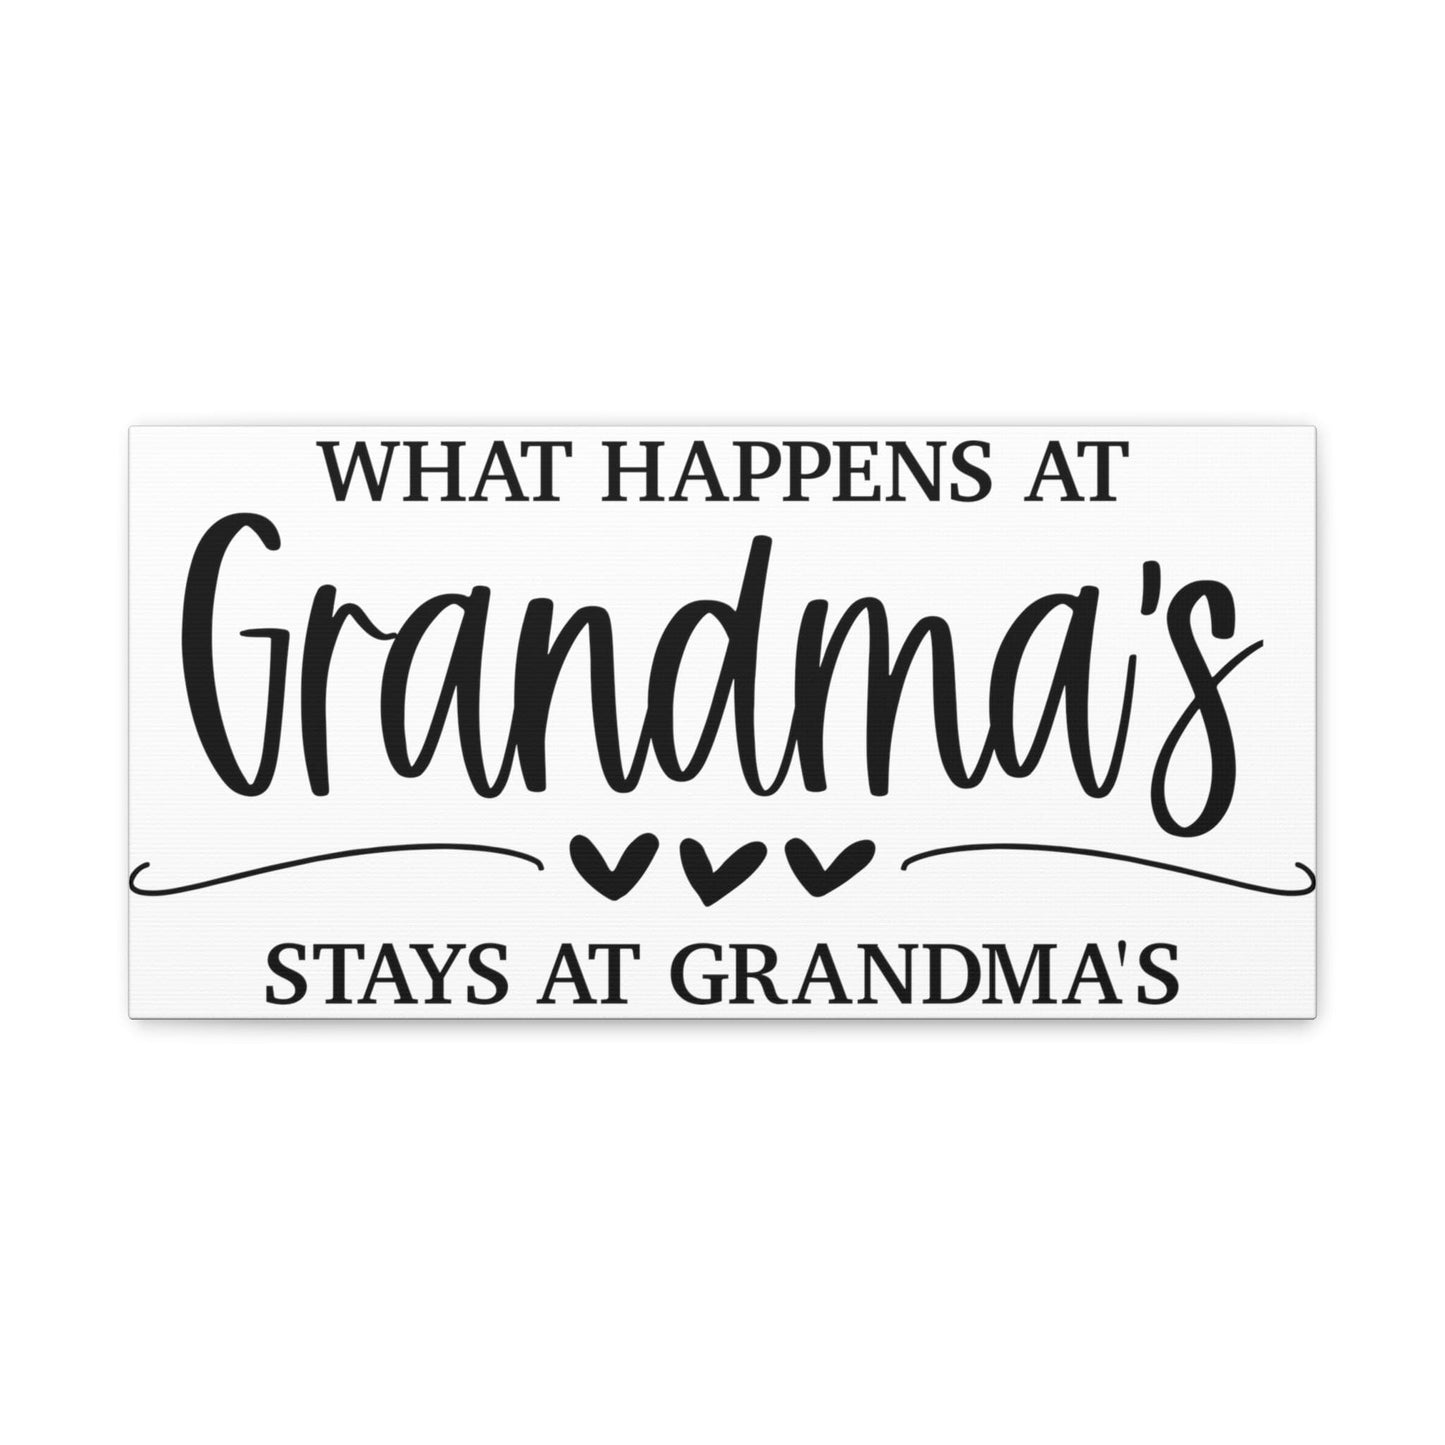 What Happens At Grandma's Stays At Grandma's Canvas Gallery Wraps